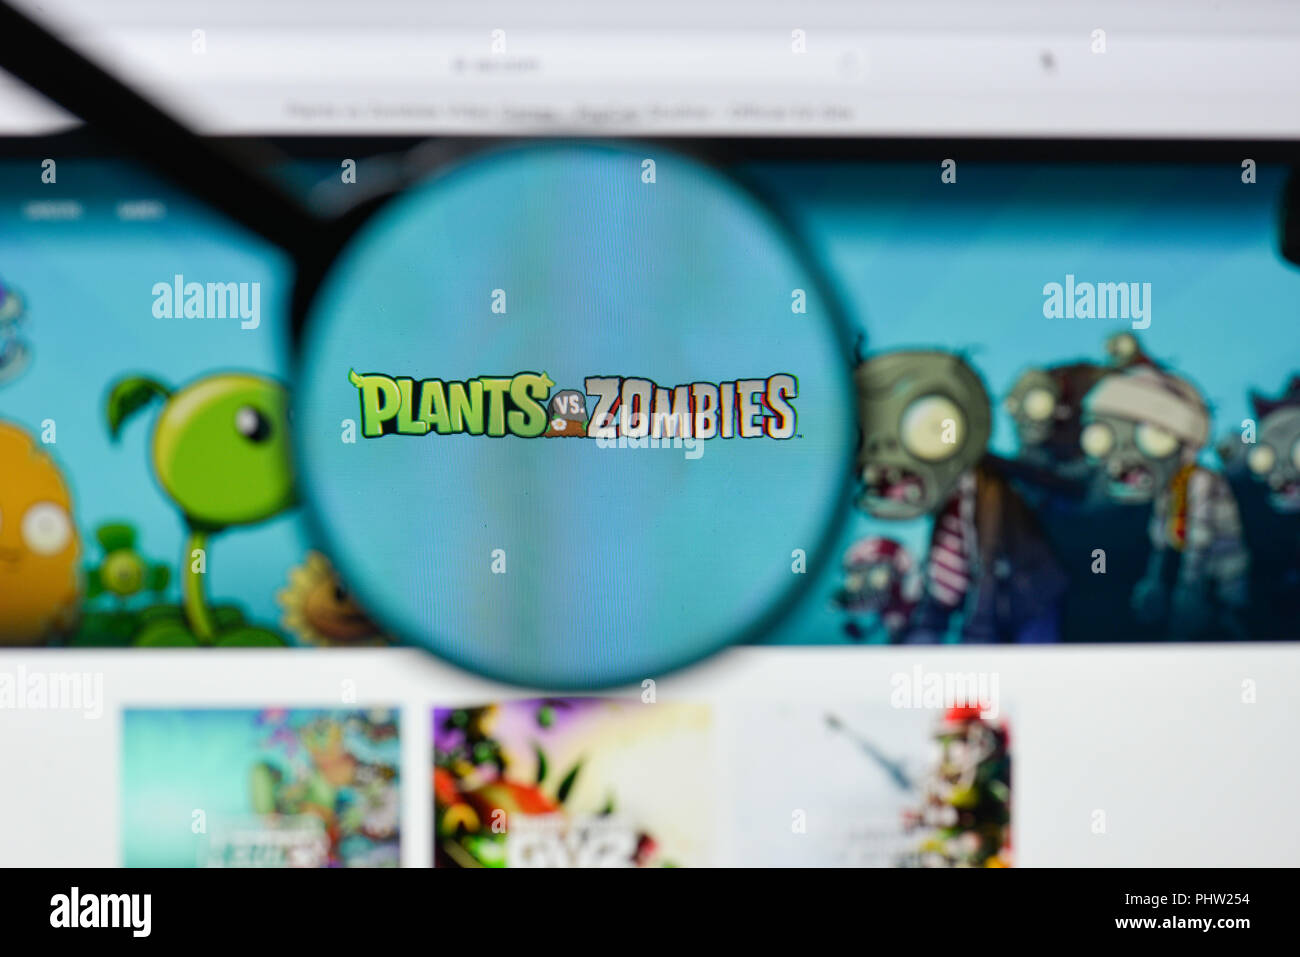 Plants vs. Zombies: Trending Images Gallery (List View)